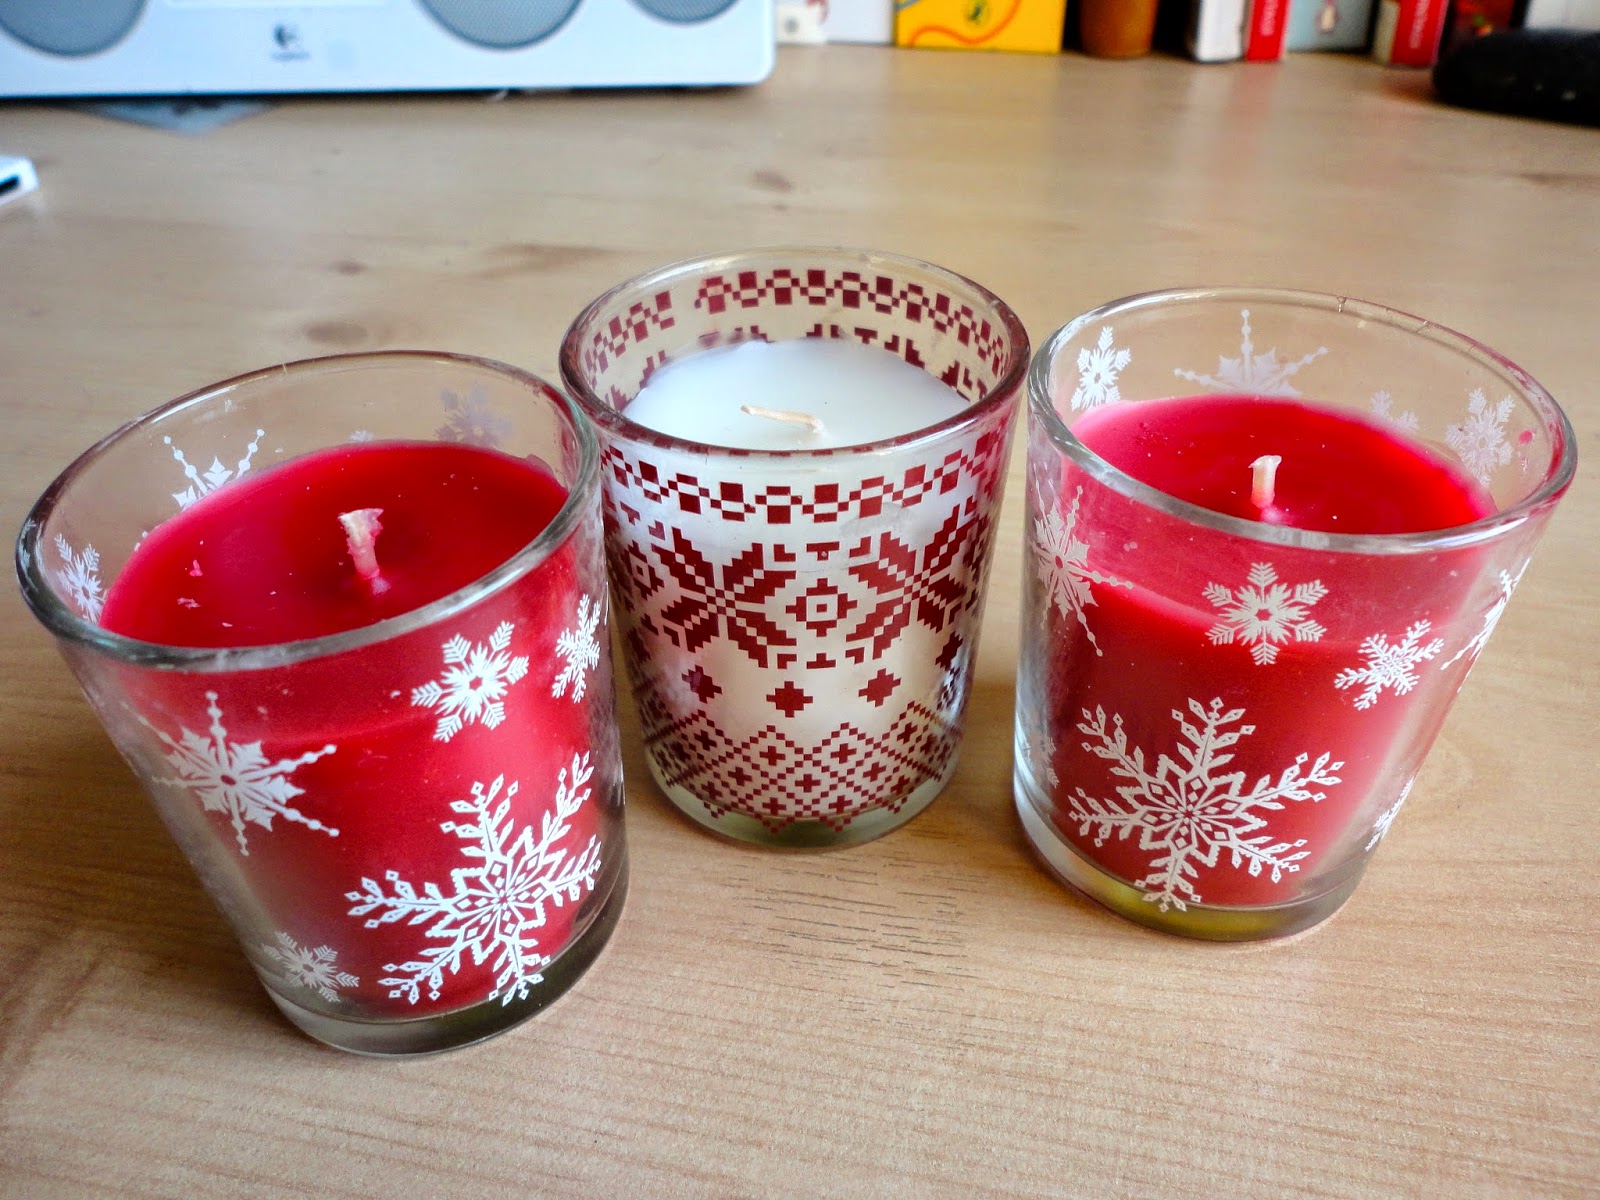 Red and white Christmas scented candles in glass holders